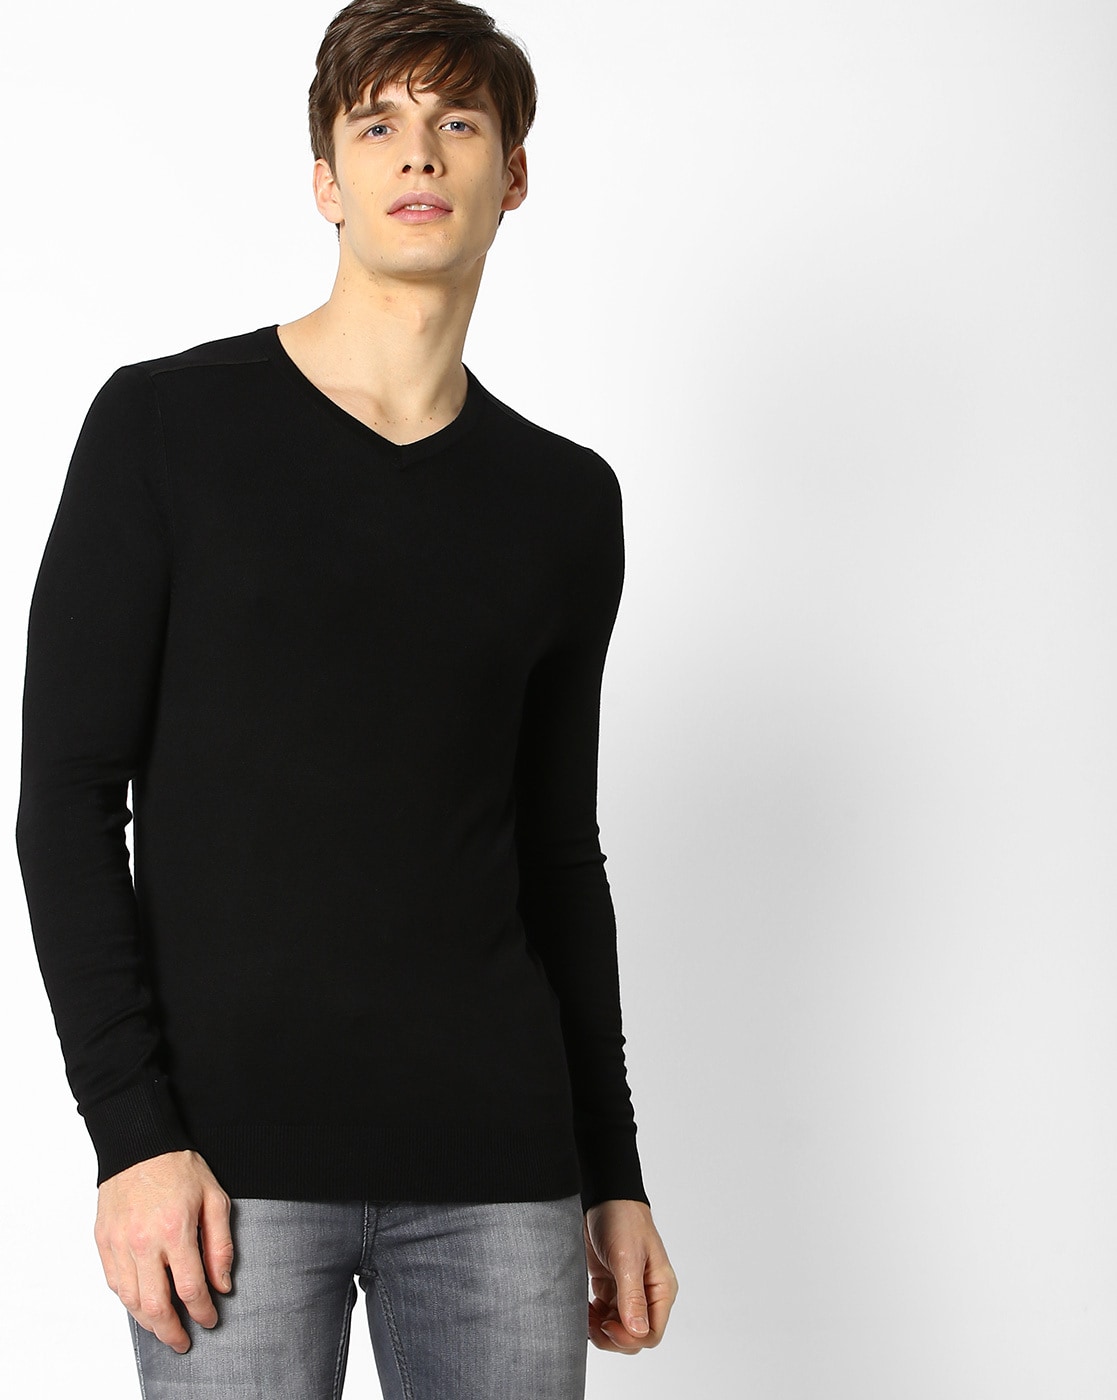 SELX Men Crewneck Knitted Pullover Elbow Patch Casual Sweater 